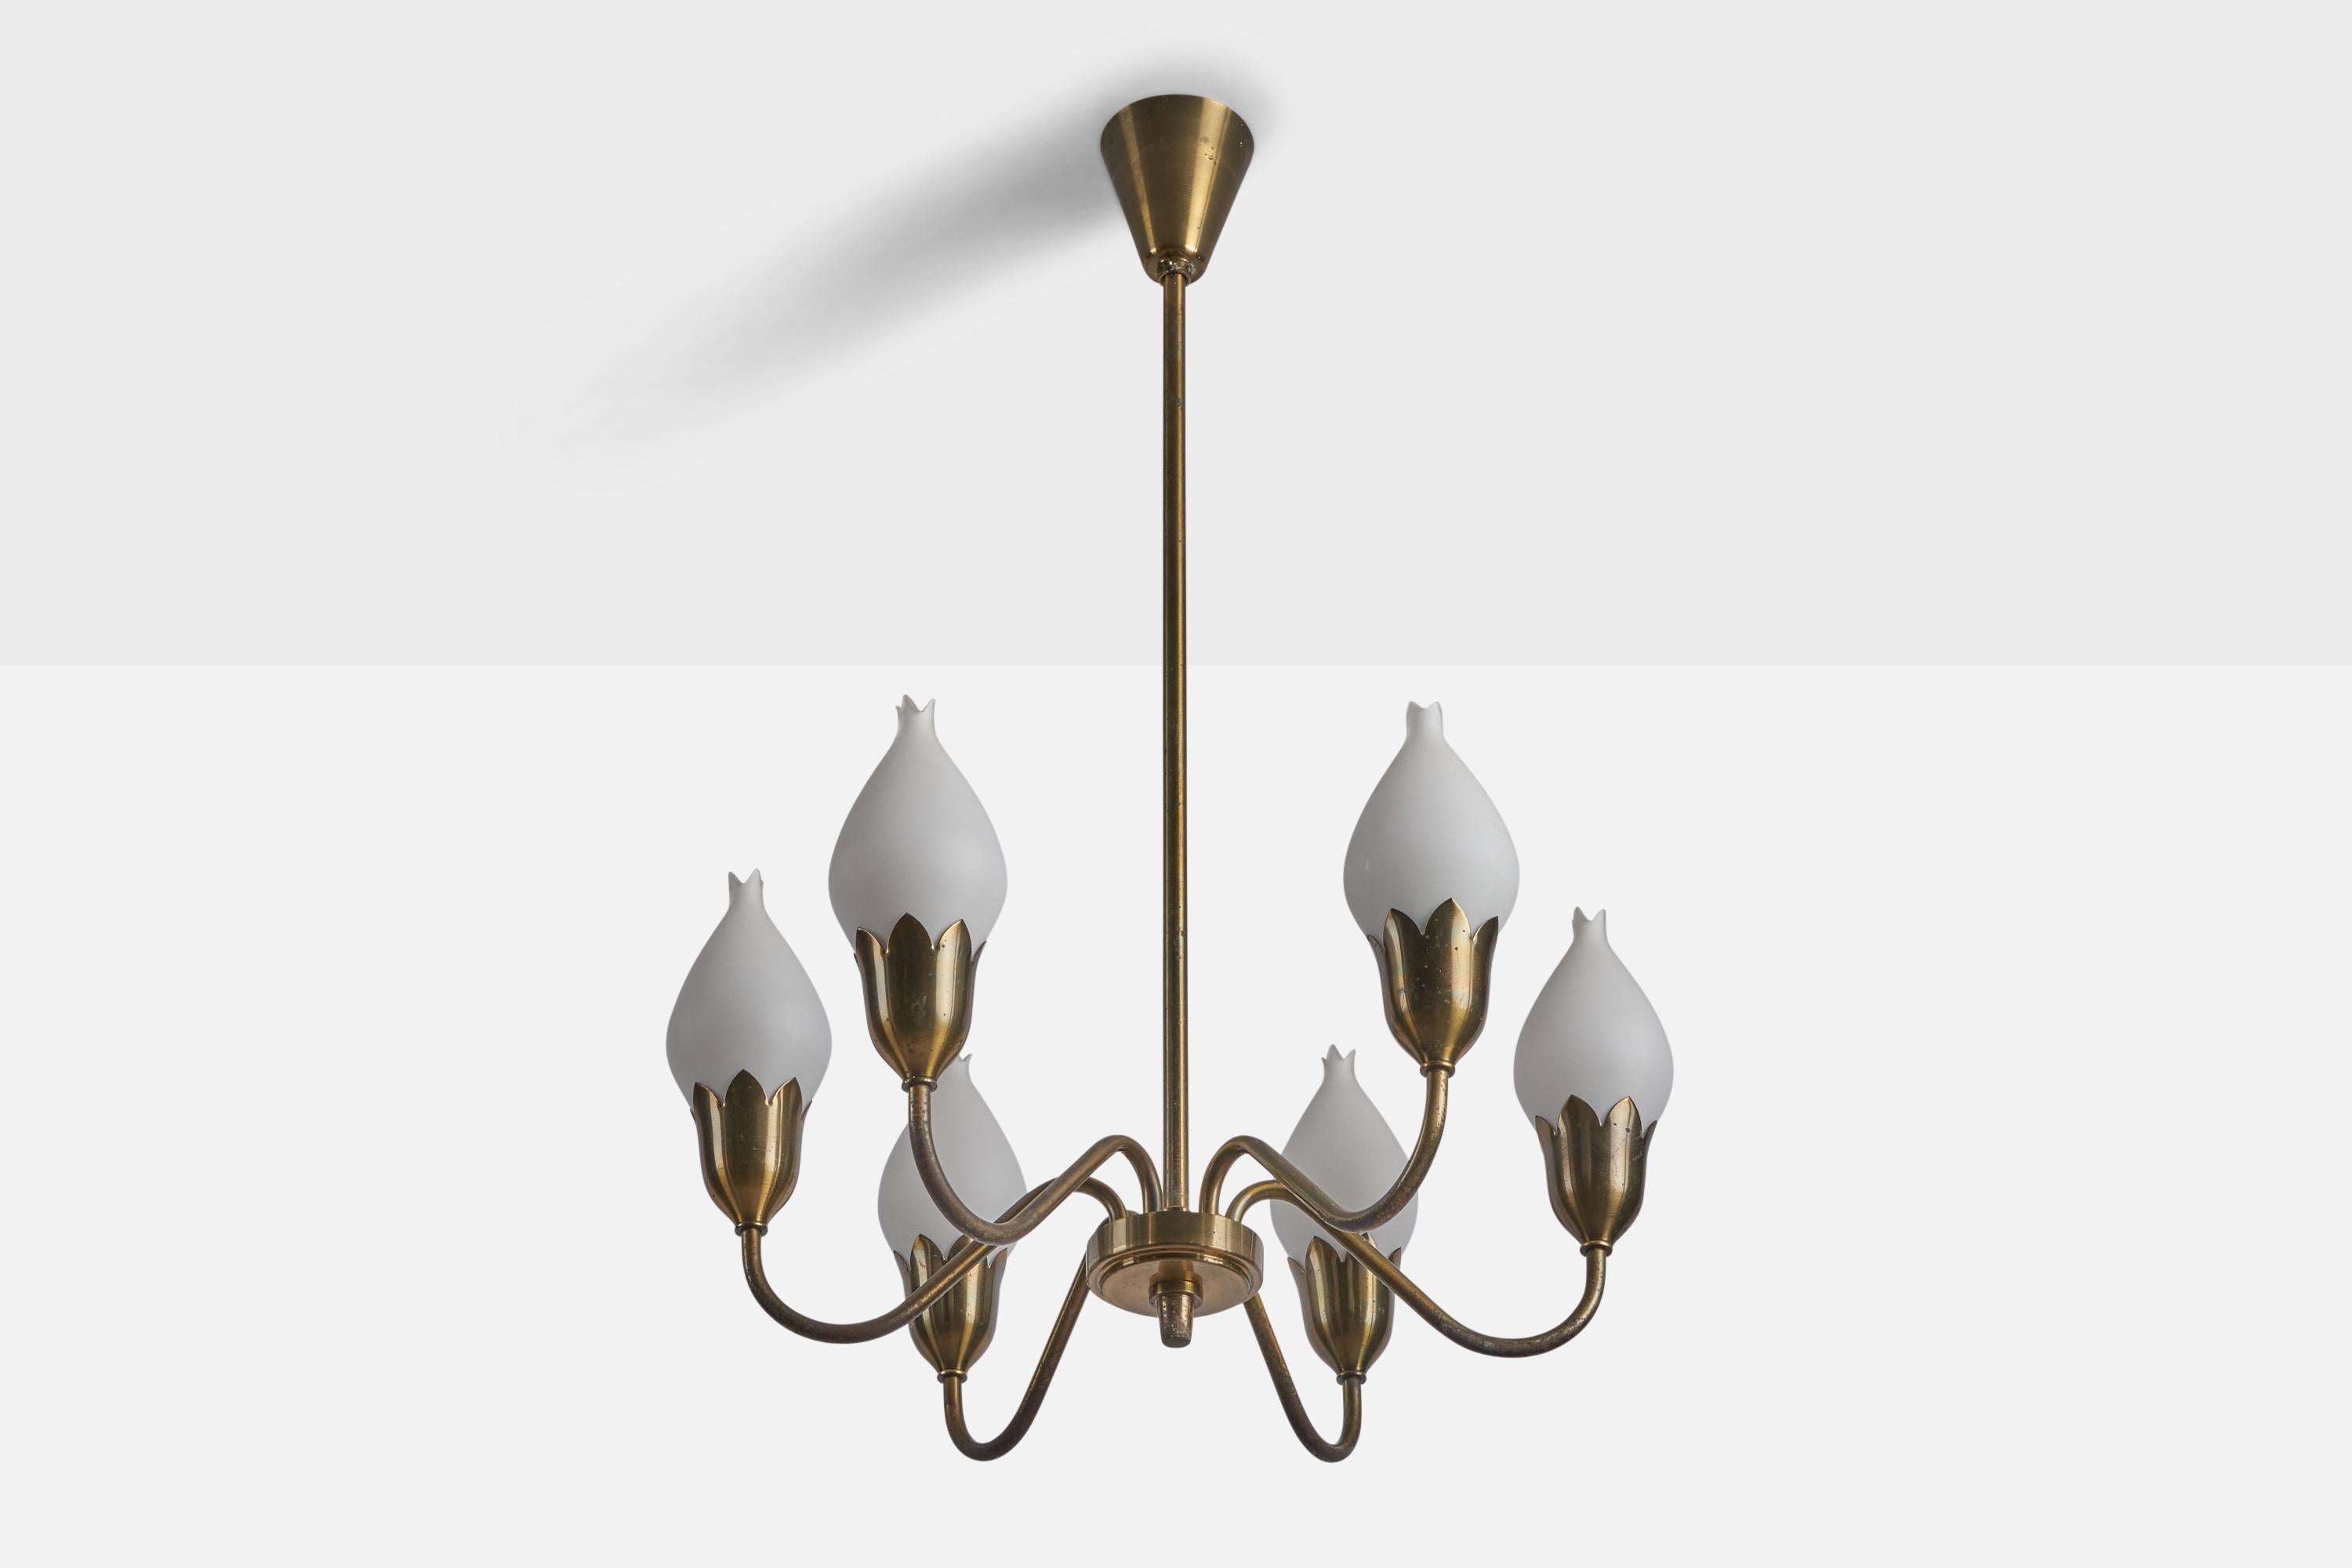 A five-armed brass and opaline glass chandelier designed and produced by 
Fog & Mørup, Denmark, c. 1960s.

Overall Dimensions (inches): 25.5” H x 19” Diameter
Bulb Specifications: E-14 Bulb
Number of Sockets: 6